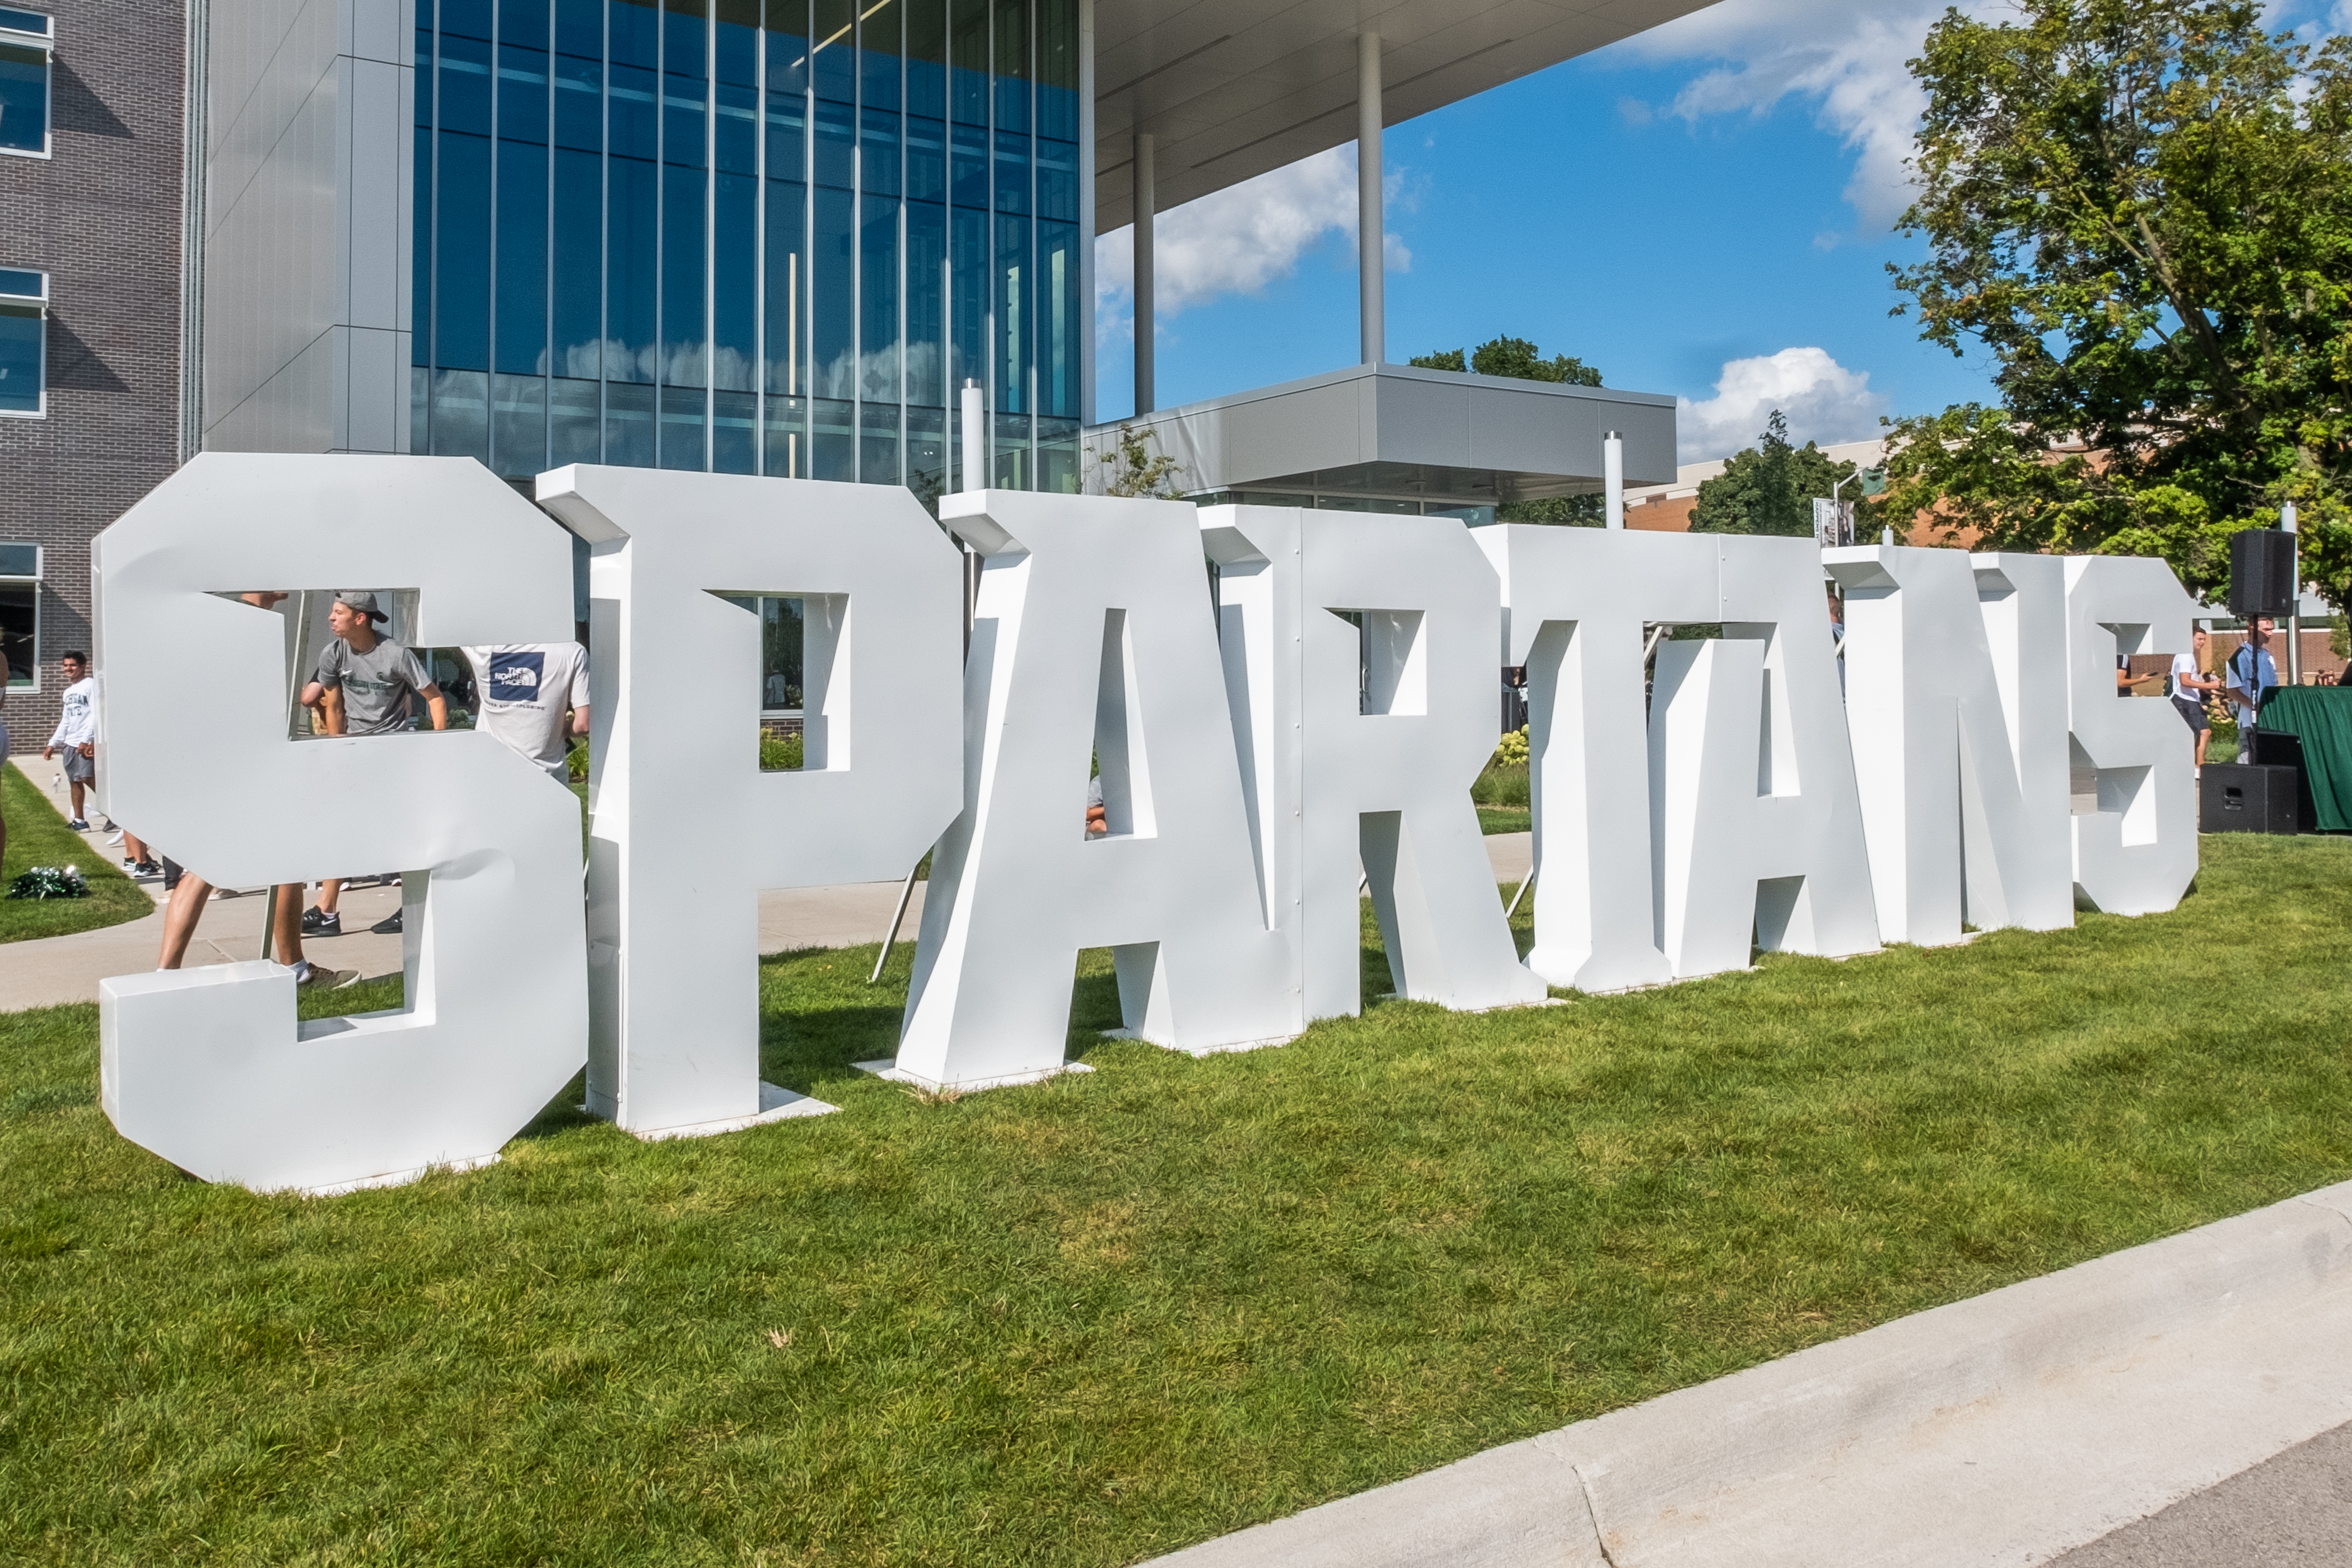 Image of the word "Spartans" in large3 foot white letters set up on the lawn outside on a sunny day. 